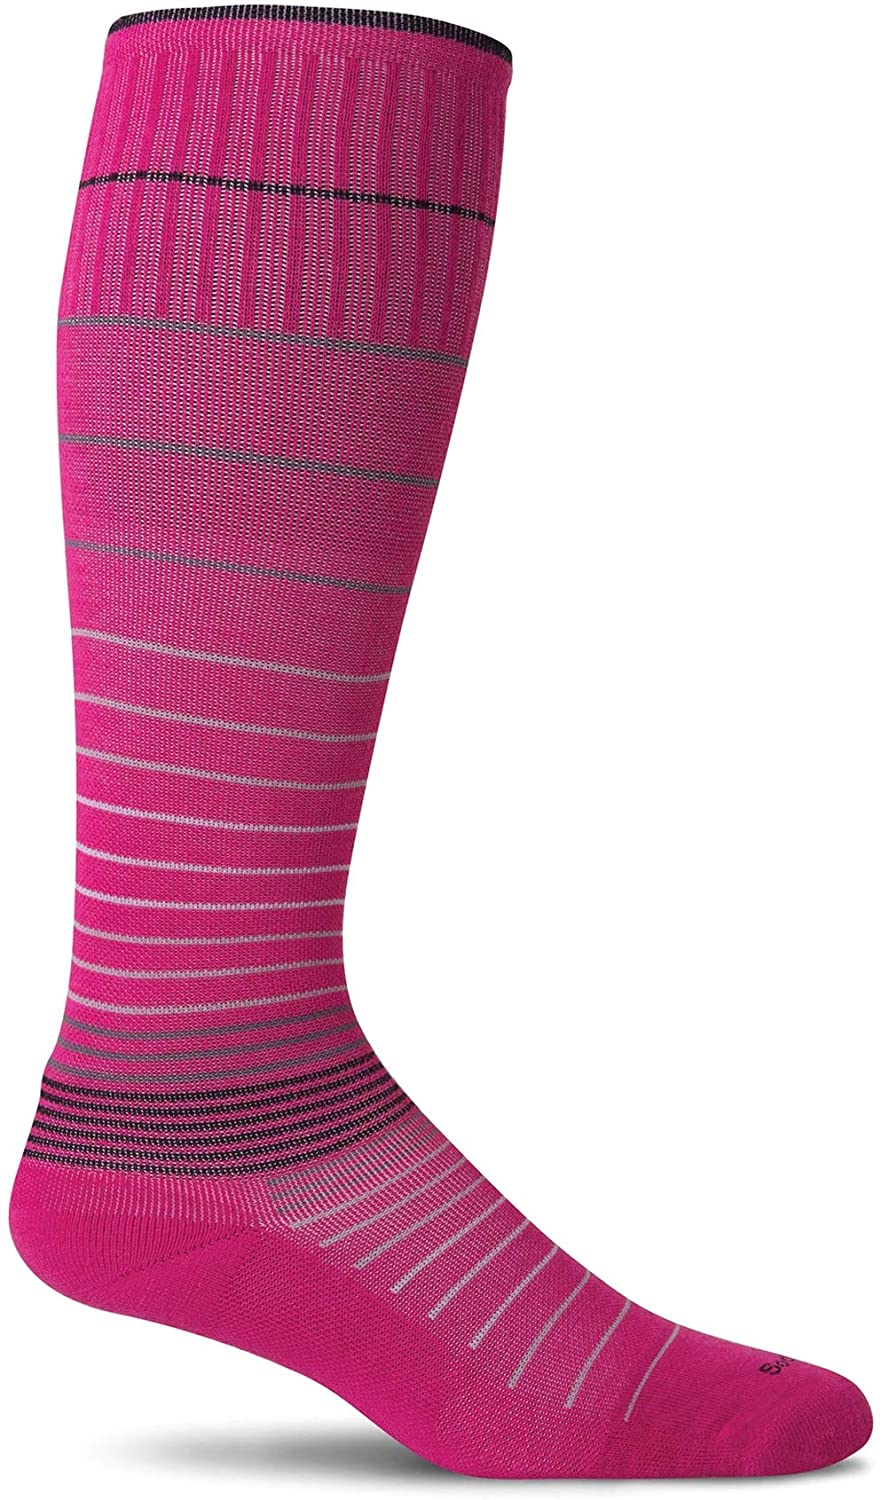 Sockwell Women's Circulator Moderate Graduated Compression Sock in Azalea from the side